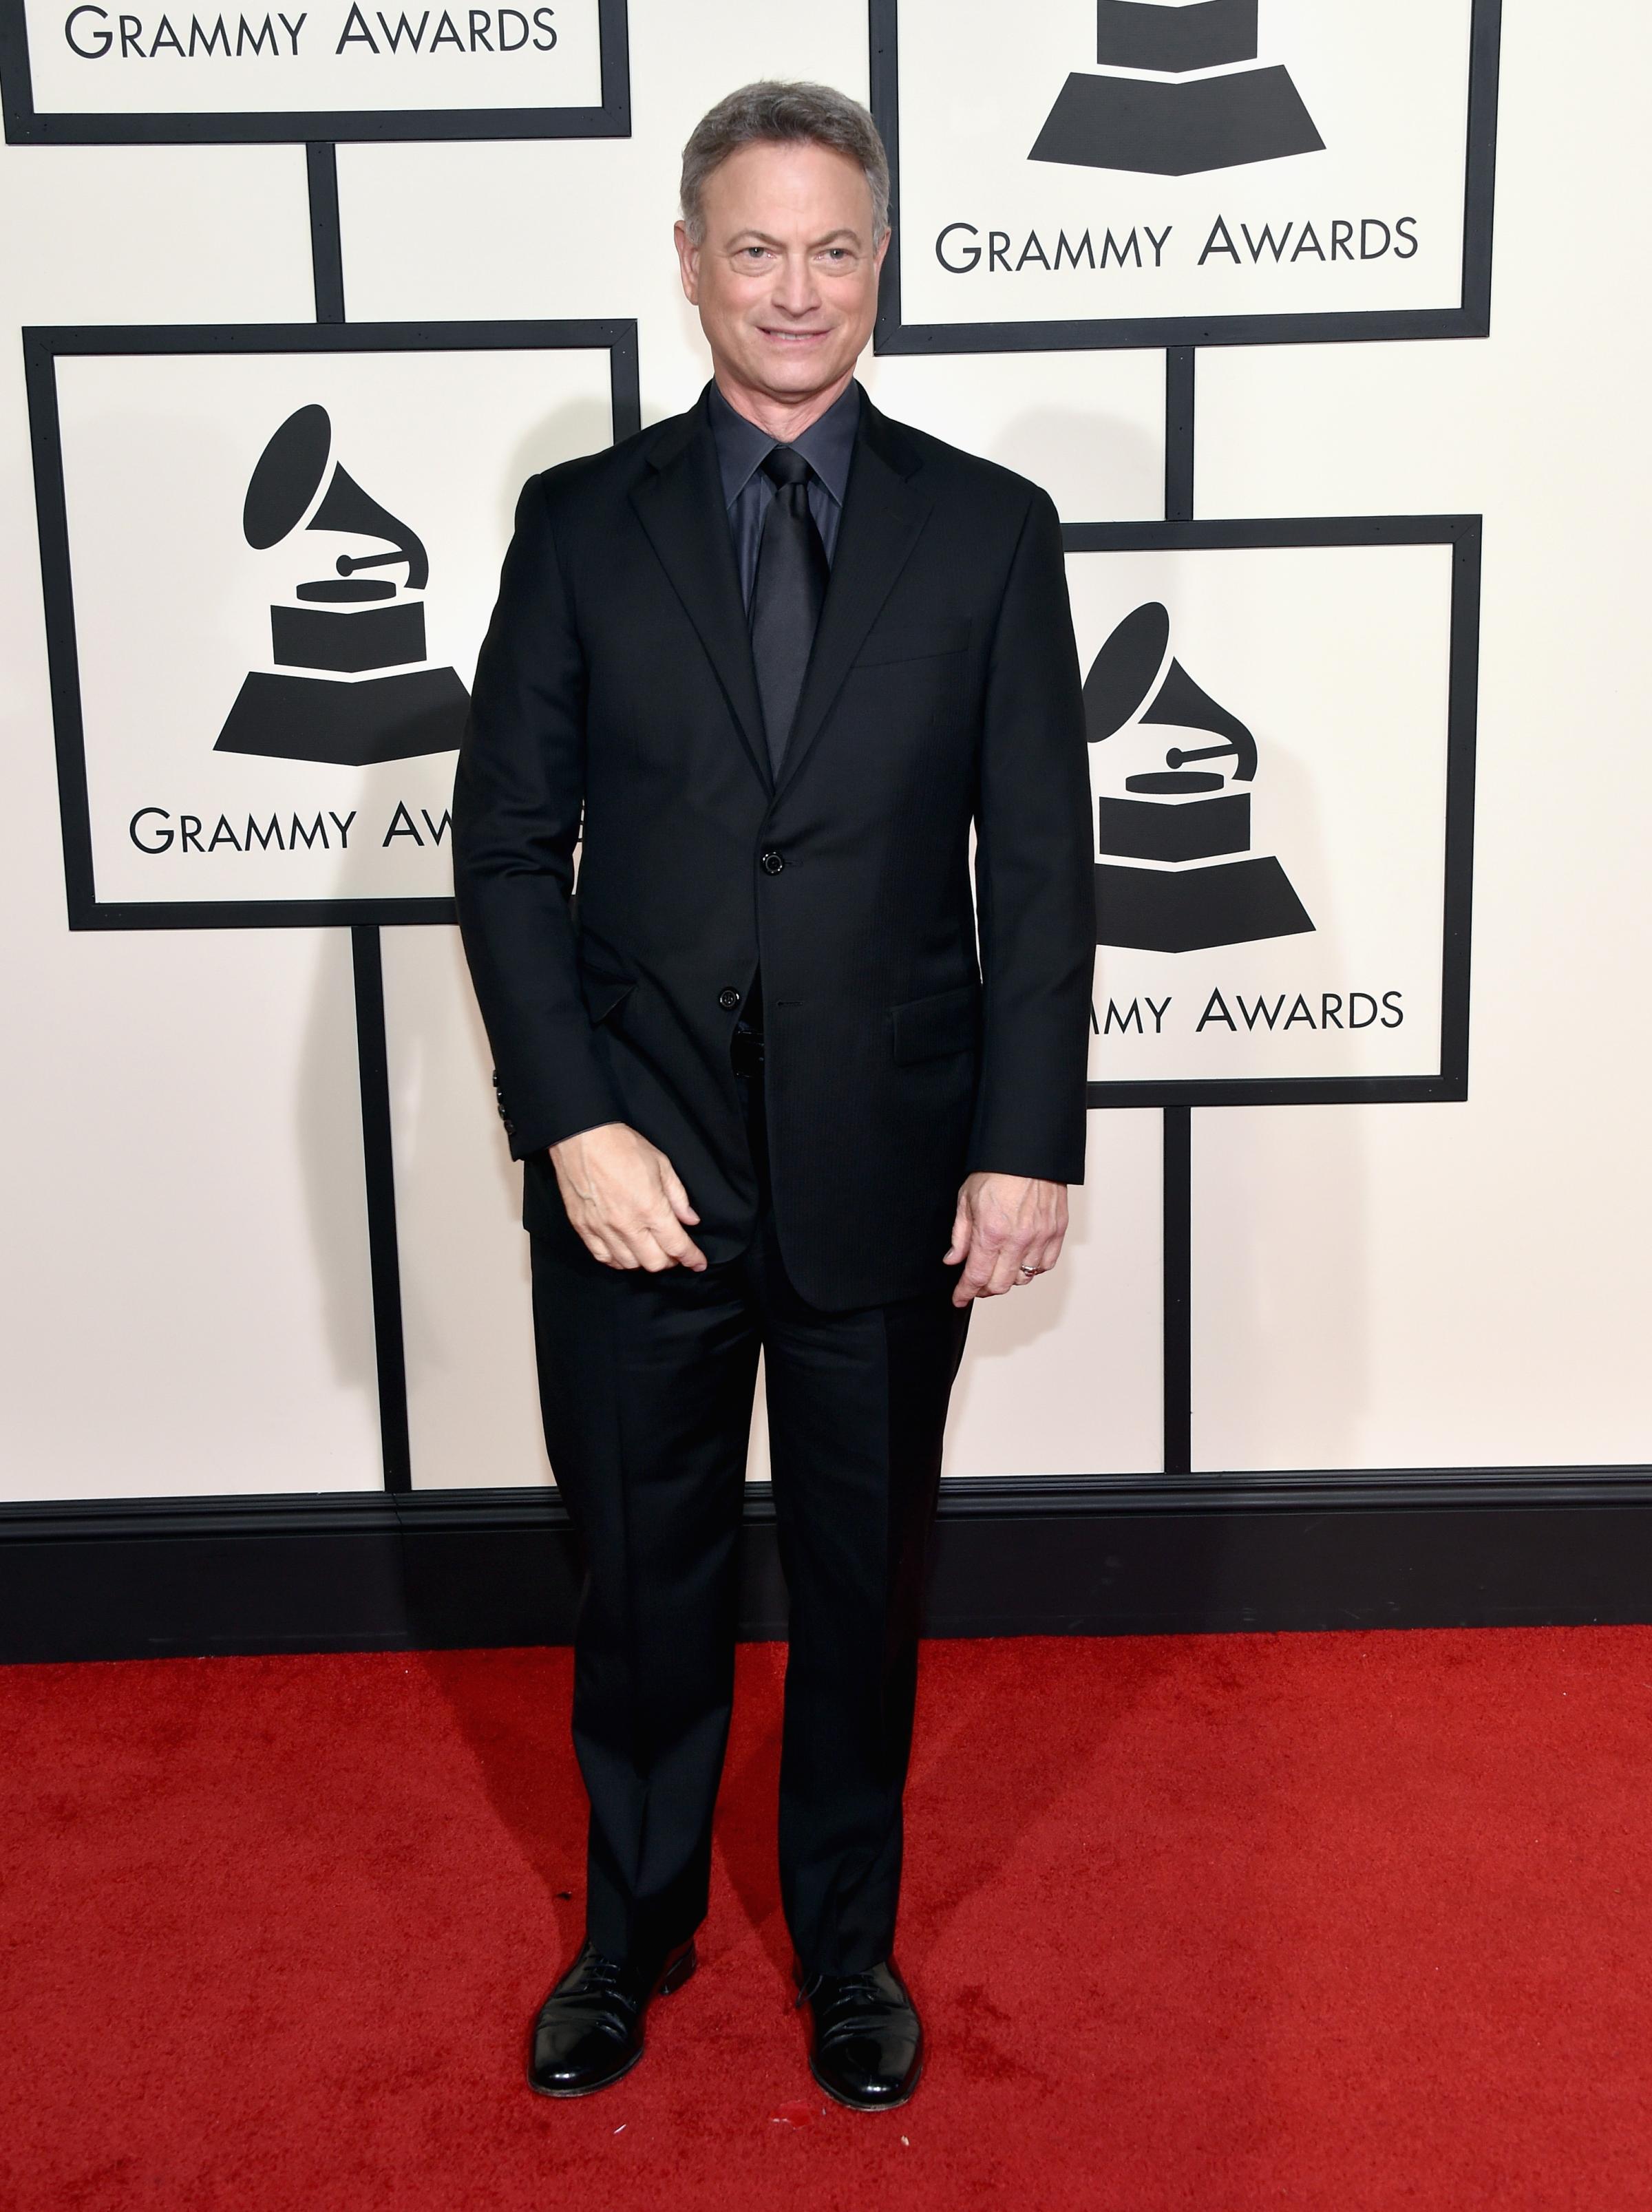 Gary Sinise attends the 58th GRAMMY Awards at Staples Center on Feb. 15, 2016 in Los Angeles.